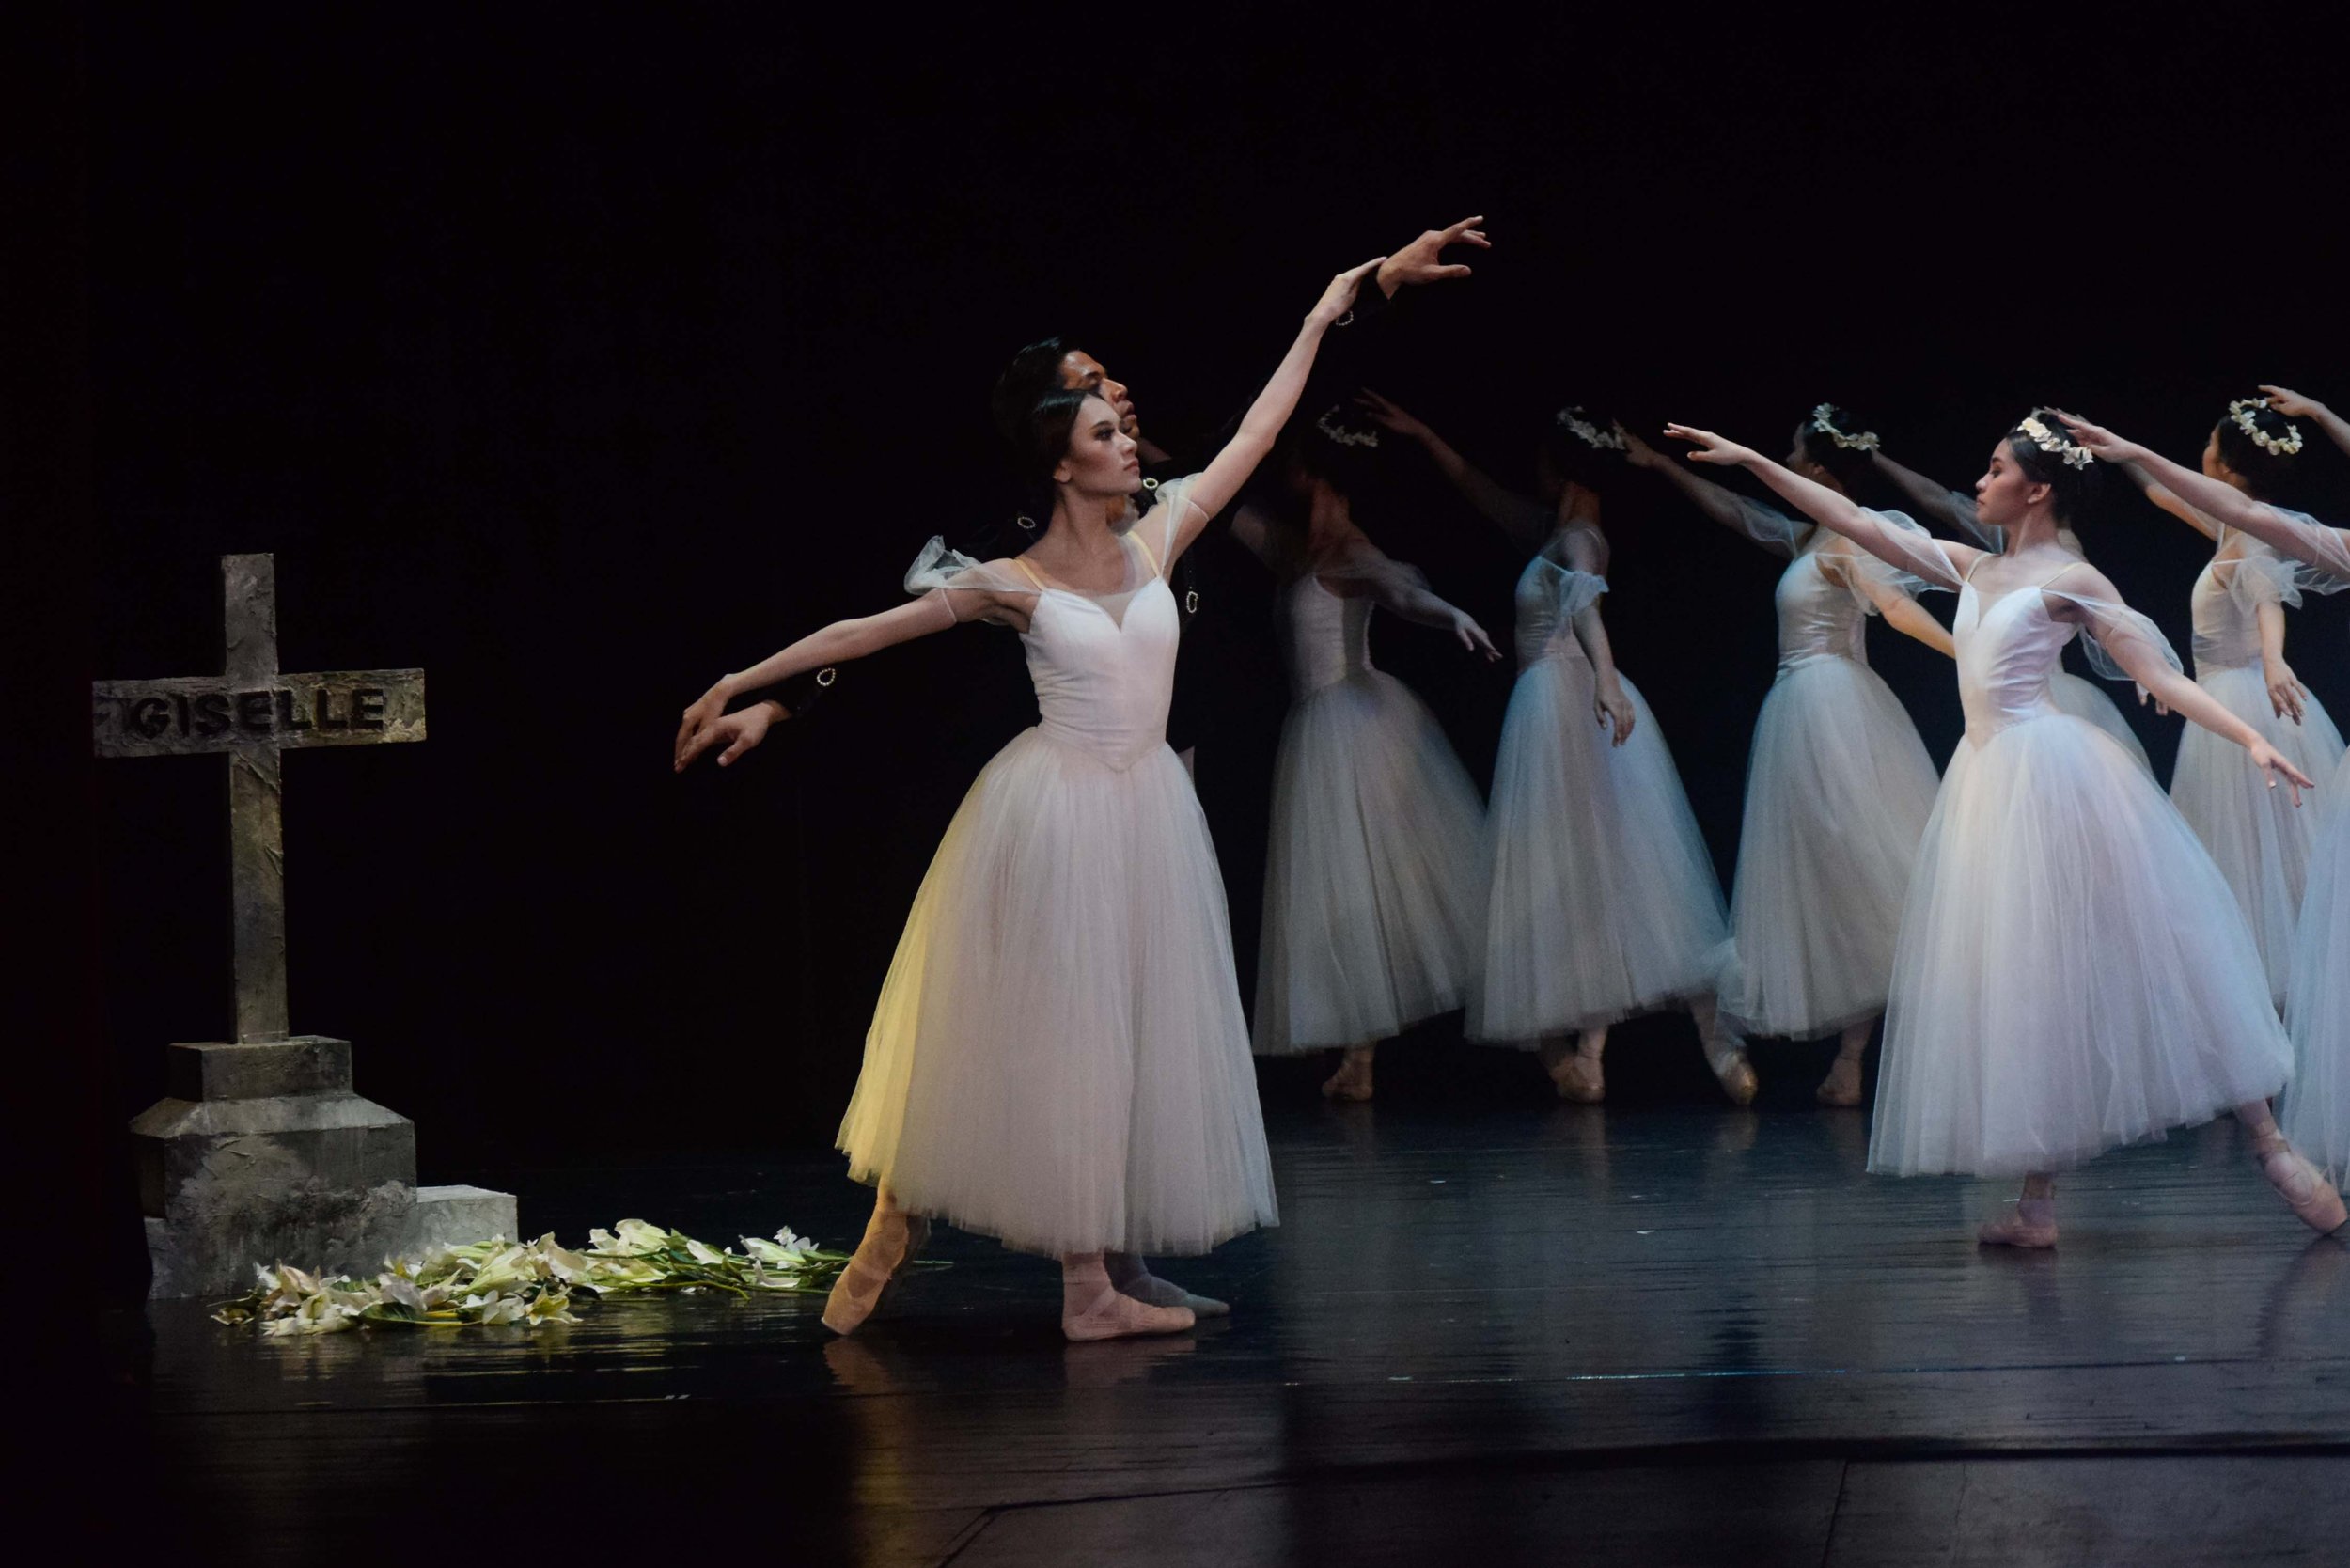    Betrayed by Albrecht (Mark Sumaylo), Giselle (Abigail Oliveiro) dies heartbroken in  Giselle  (2019), joining other jilted women to become spirits known as the wilis in wispy white dresses. Despite his disloyalty, Giselle seeks to protect Albrecht